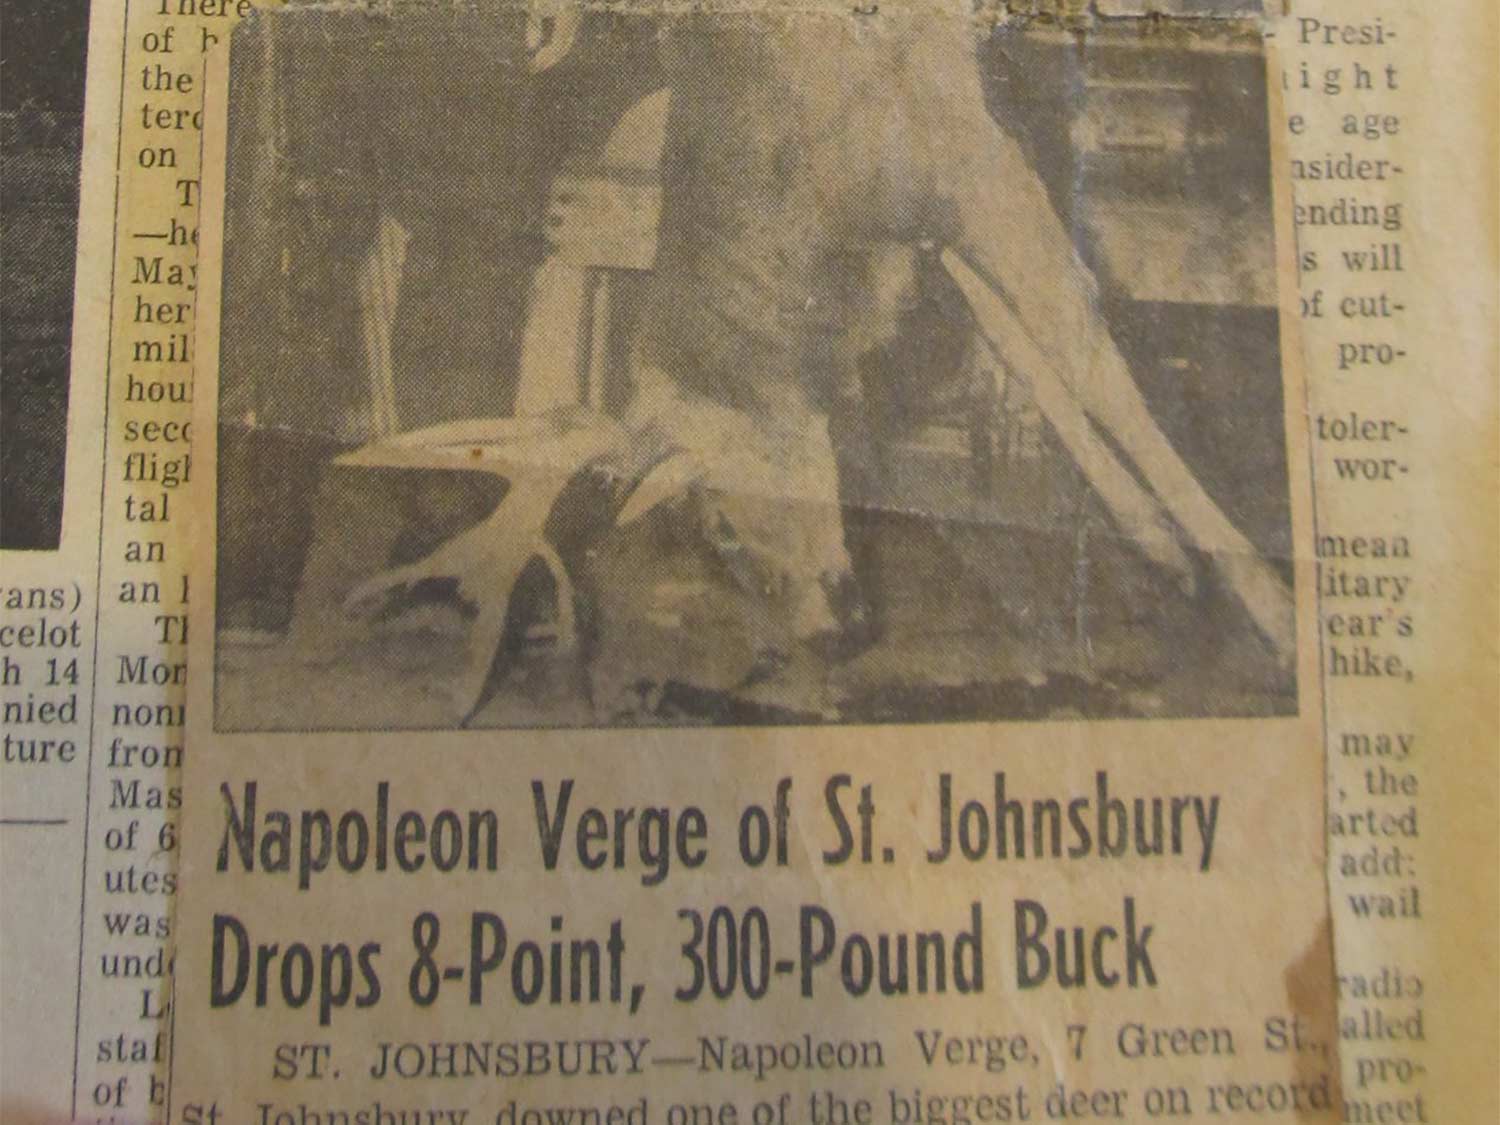 A newspaper clipping showing an image of a buck and the headline: "Napolean Verge of St. Johnsbury Drops 8-Point, 300-Pound Buck"